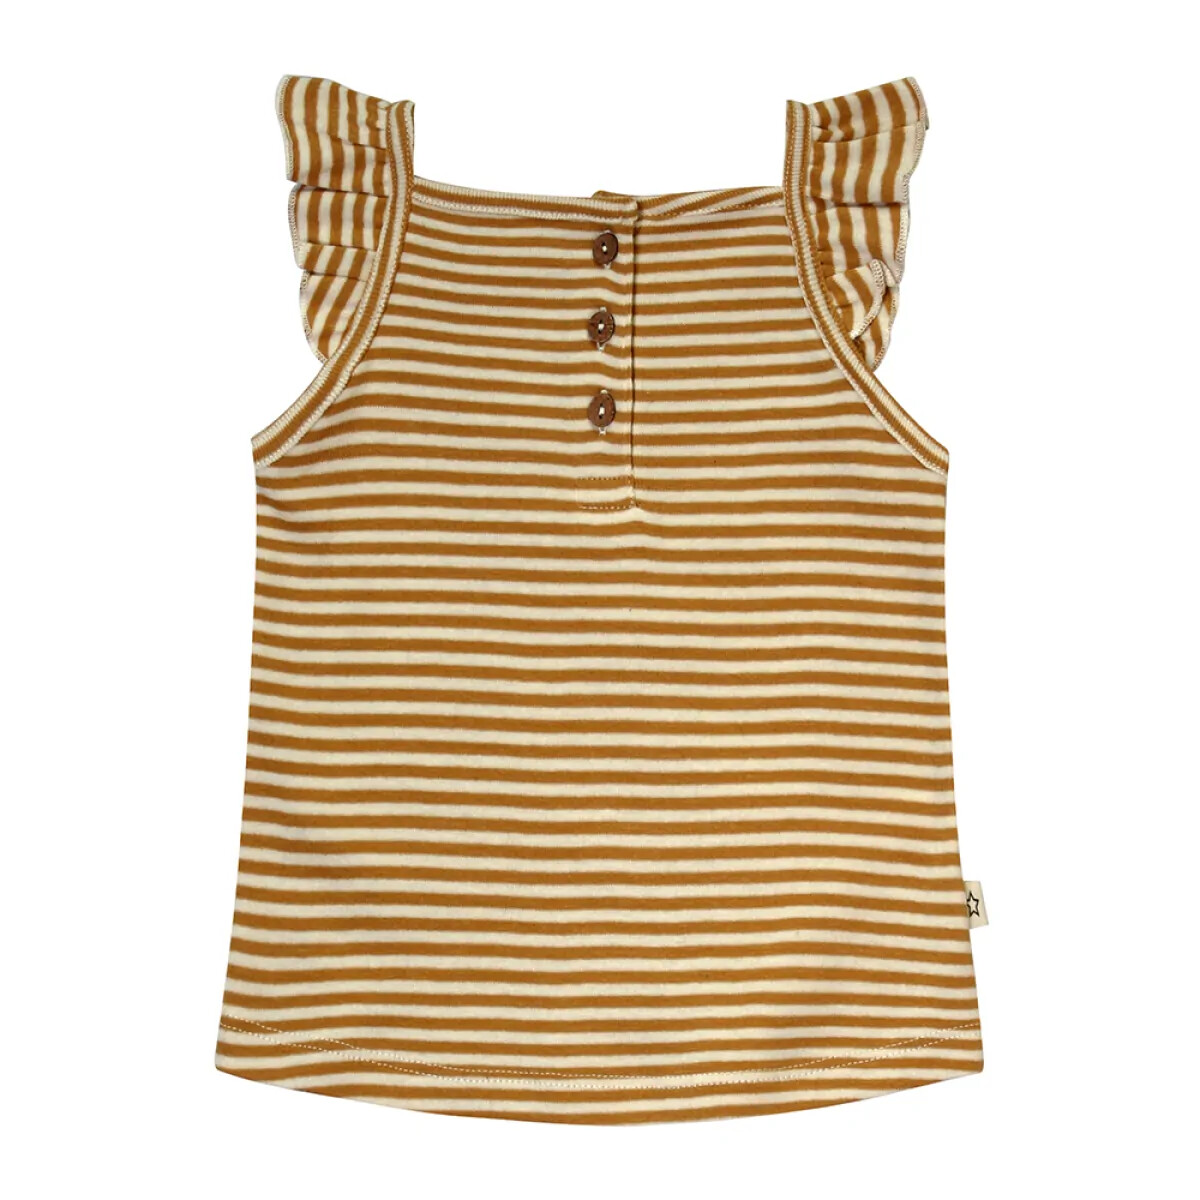 Your Wishes Shirt Gold Stripes Ruffle